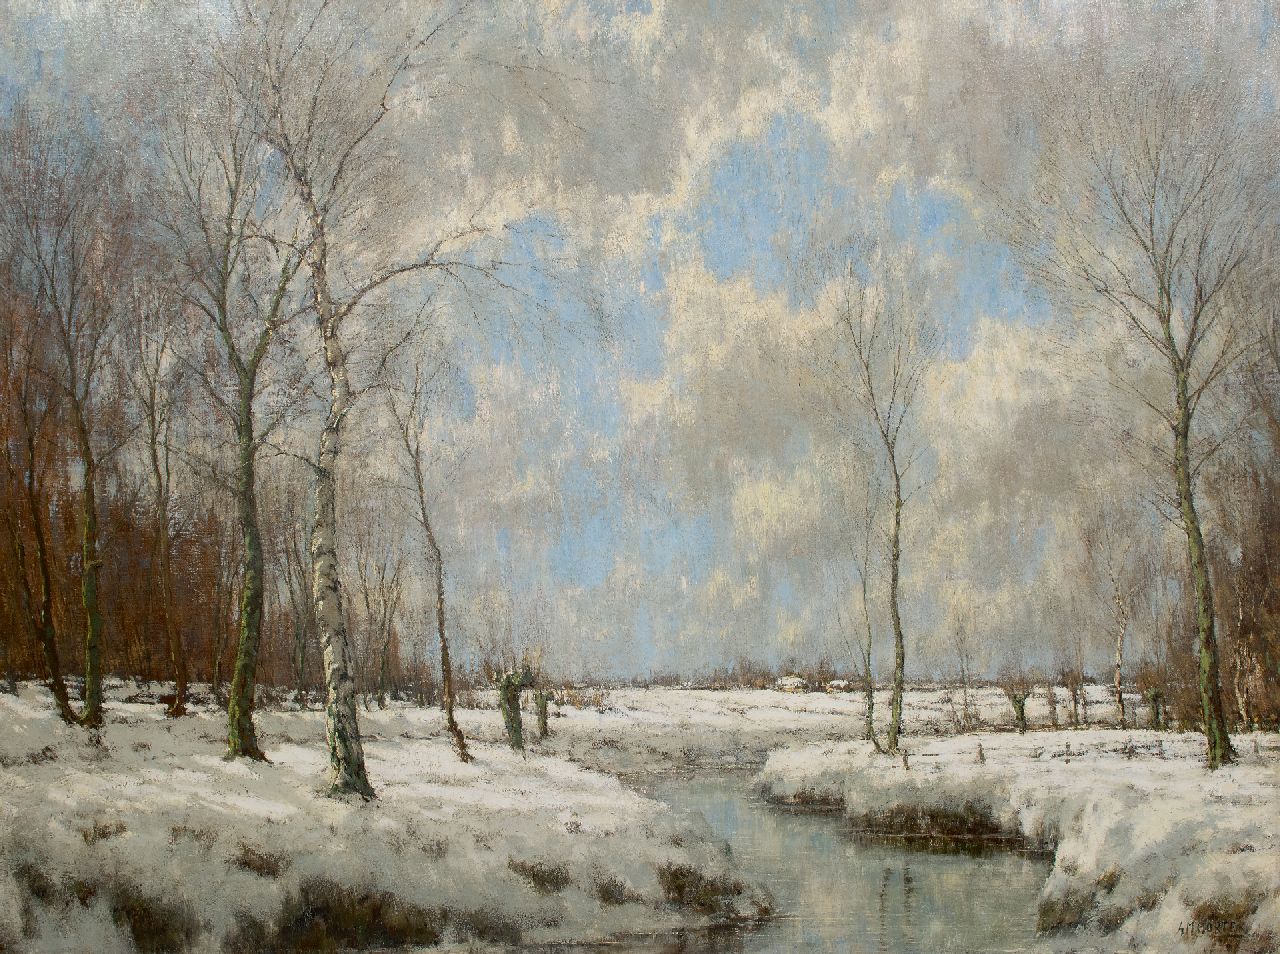 Gorter A.M.  | 'Arnold' Marc Gorter | Paintings offered for sale | The Vordense Beek in winter, oil on canvas 114.9 x 154.7 cm, signed l.r. (twice)